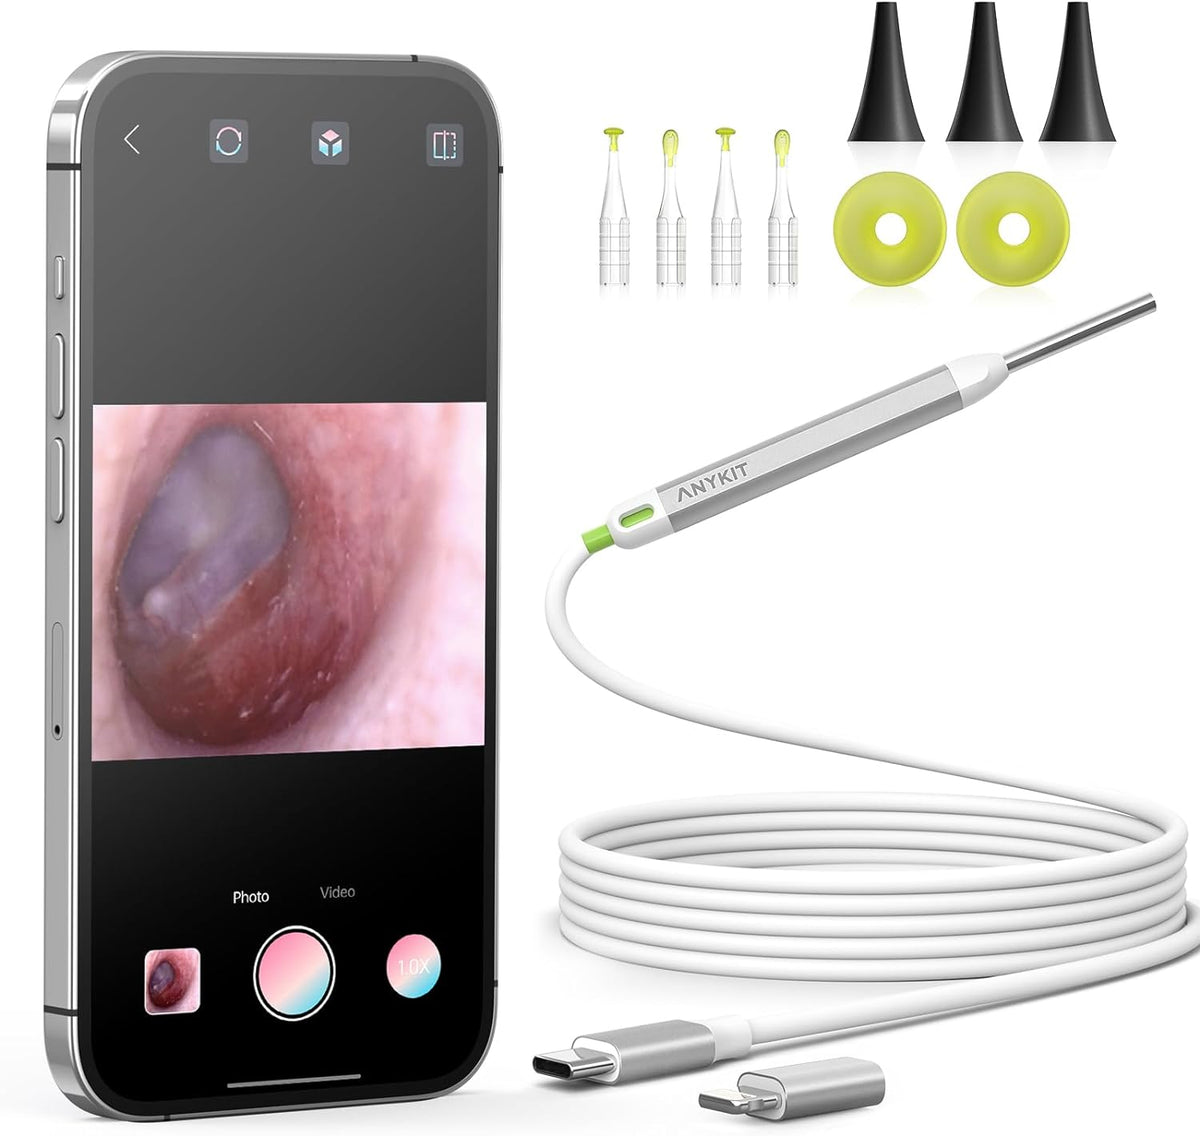 Anykit Ear Wax Removal Tool, HD Ultra Clear View Ear Cleaner Otoscope Ear Camera with Wax Remover, Adjustable LED Light, Ear Scope with Ear Spoon for iPhone & Android